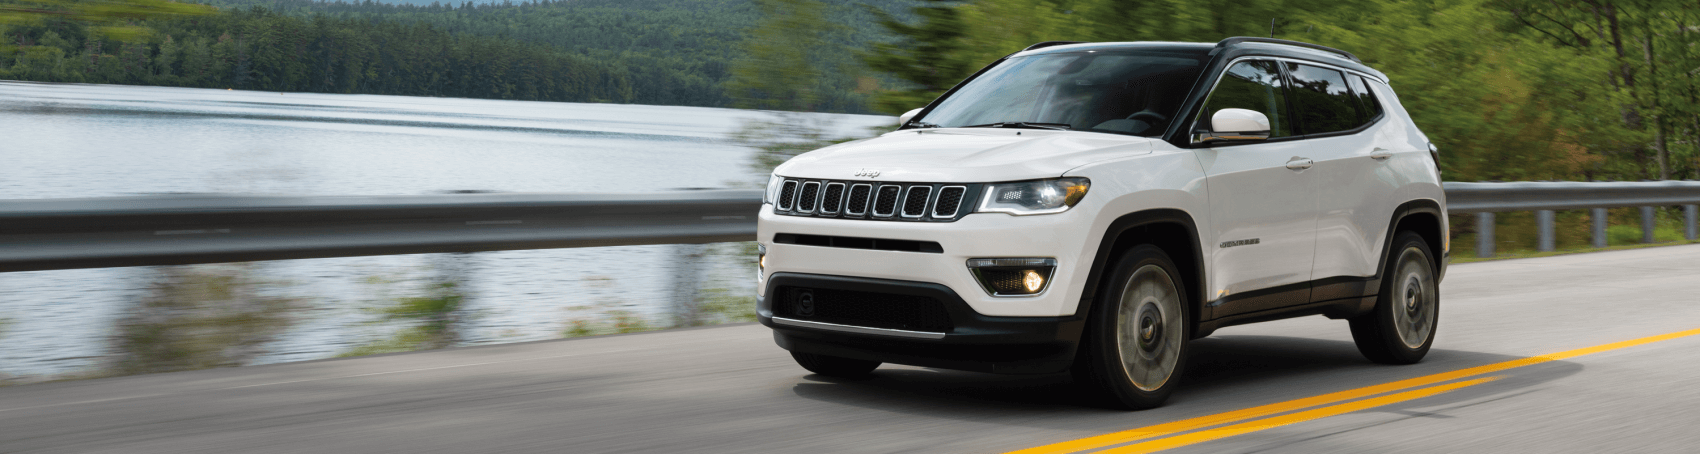 2021 Jeep Compass Limited White Mountain Road